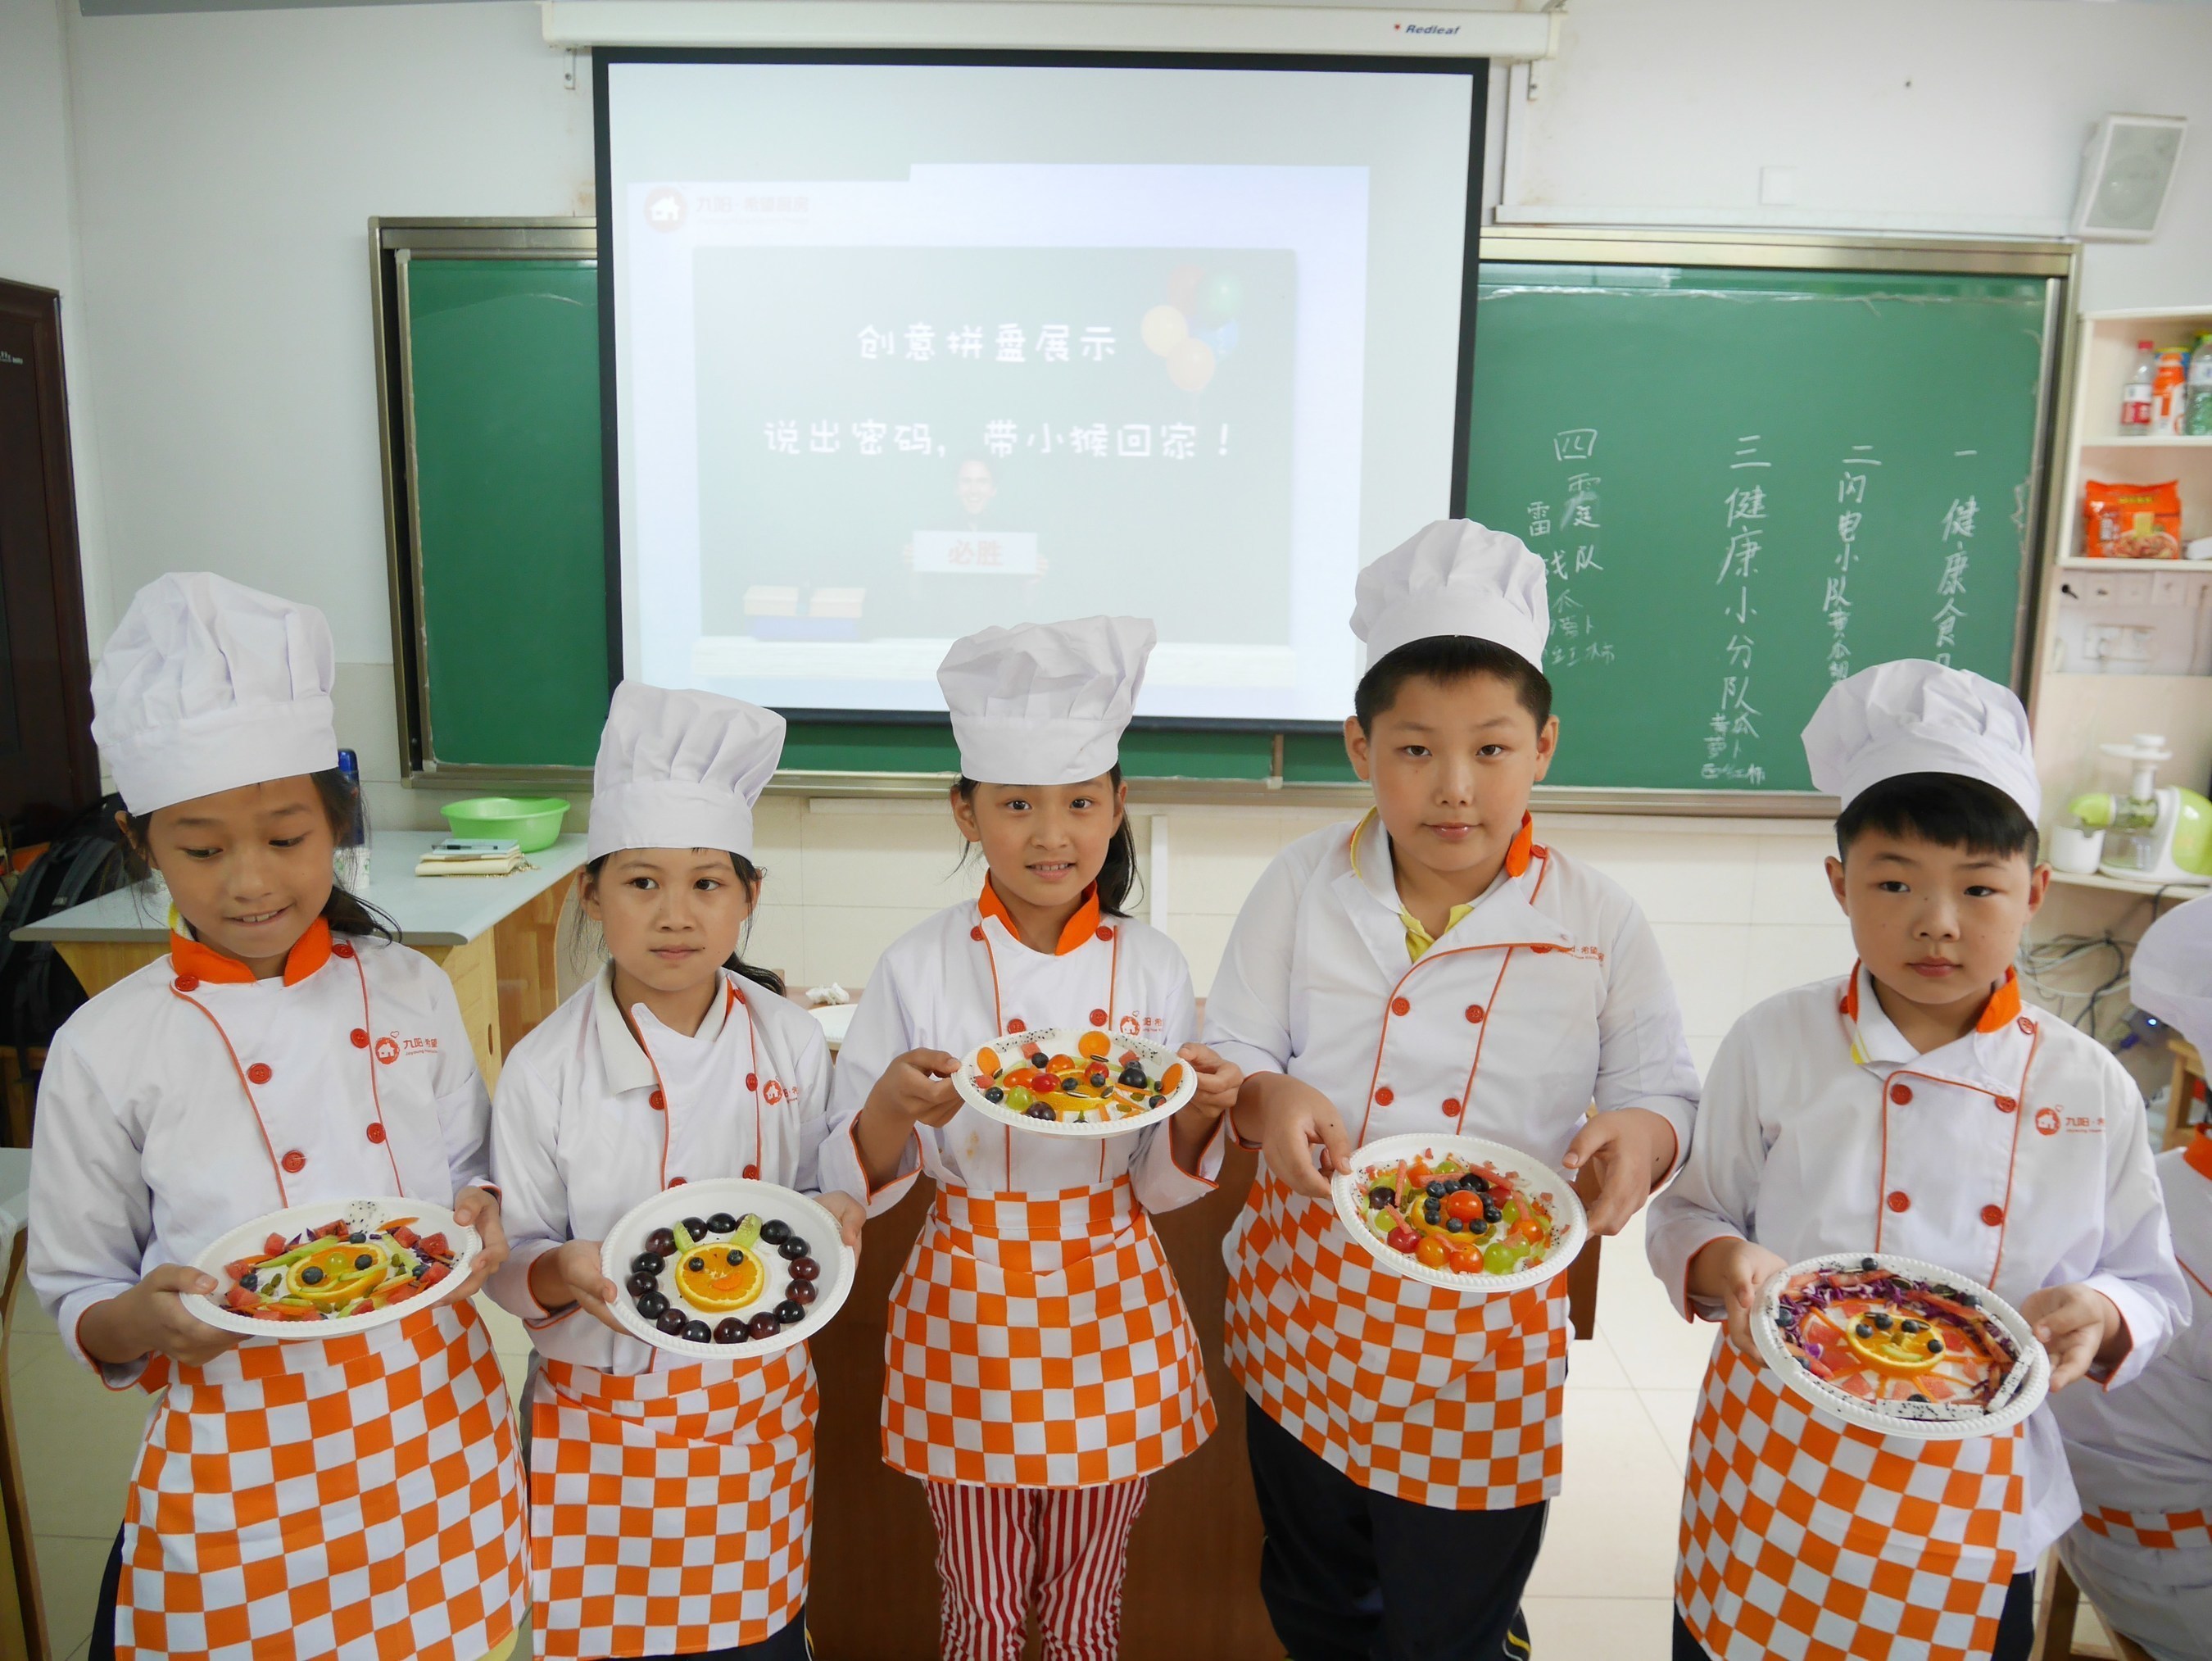 Students showcasing their innovative food creations